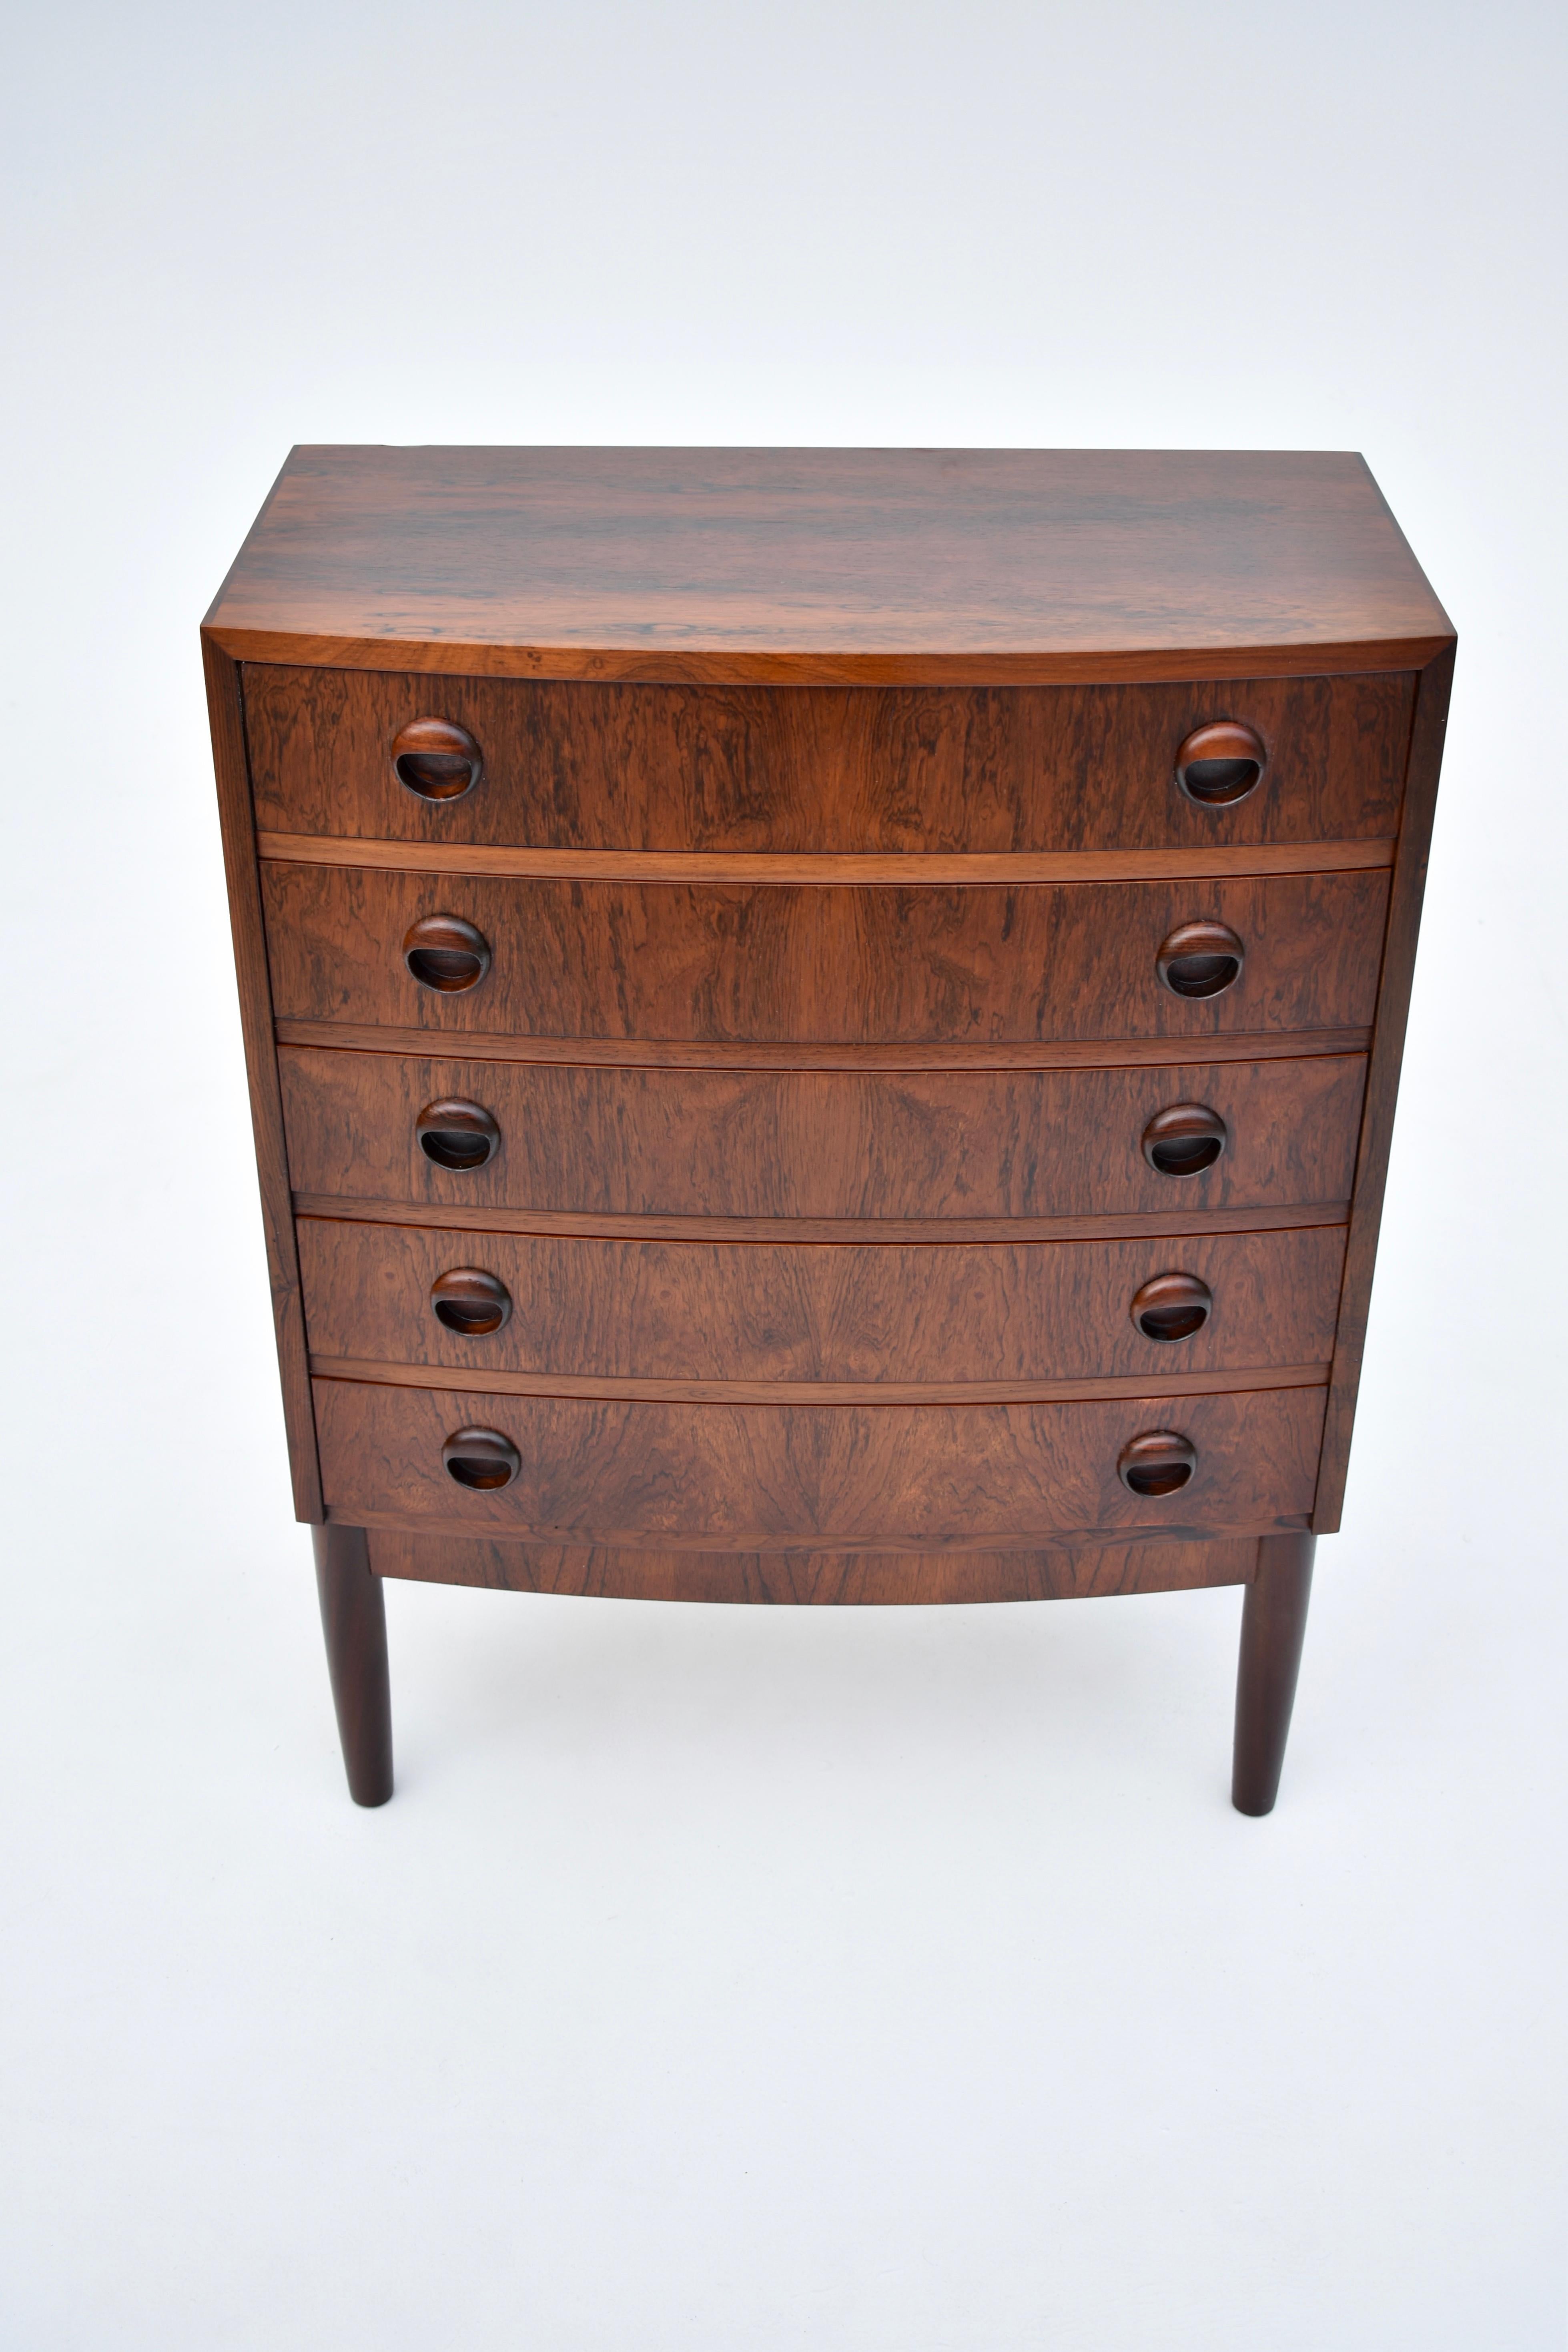 Wonderful little Brazilian rosewood chest of Drawers by Kai Kristiansen. An elegant bow fronted design with beautifully detailed drawer pulls. Very attractive and unusual whorled grain exhibited to the timber on this example.